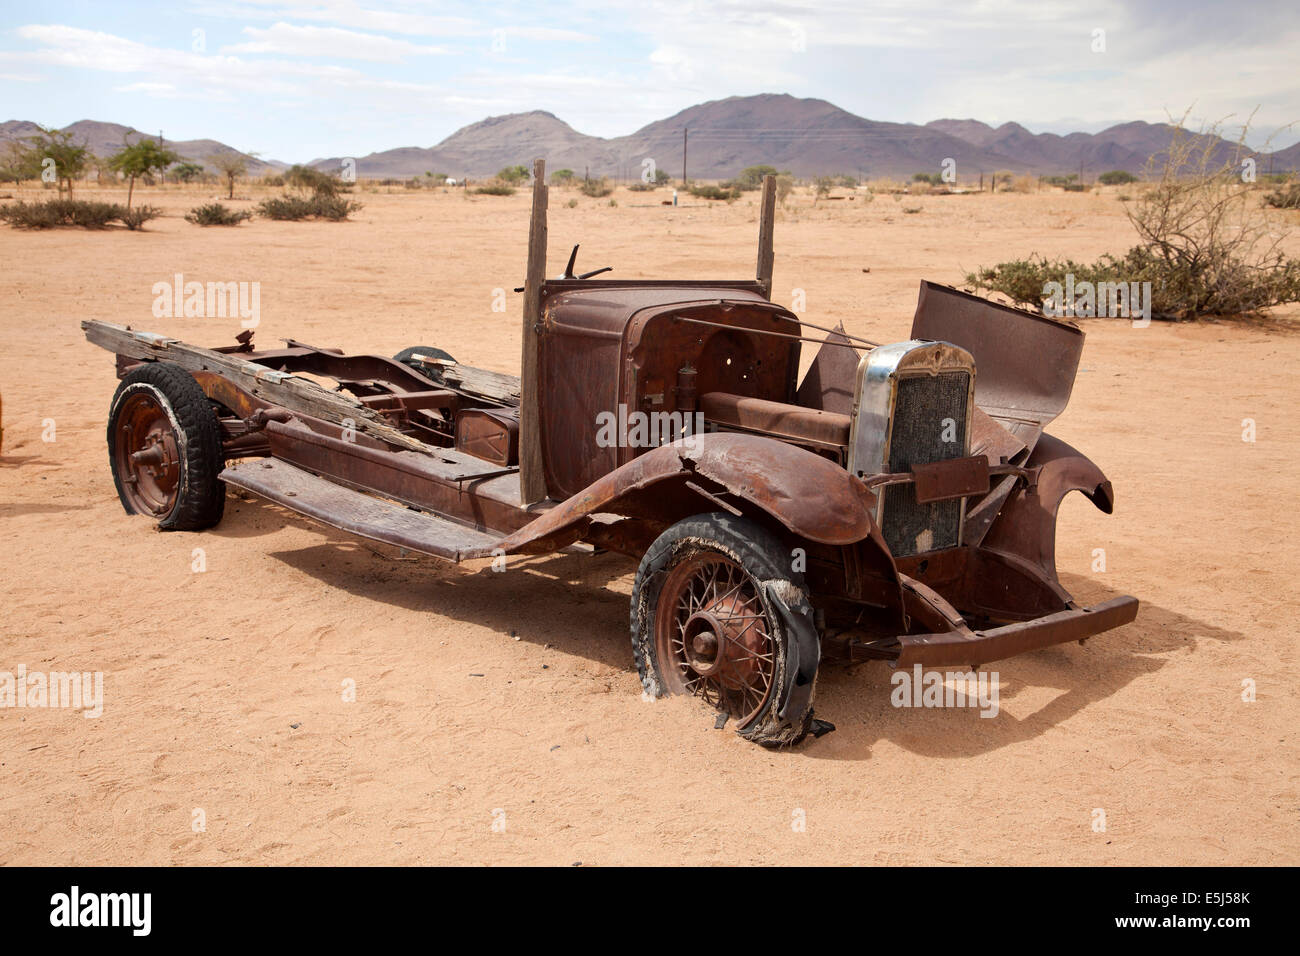 car wreck in the desert of Solitaire, Namibia, Africa Stock Photo